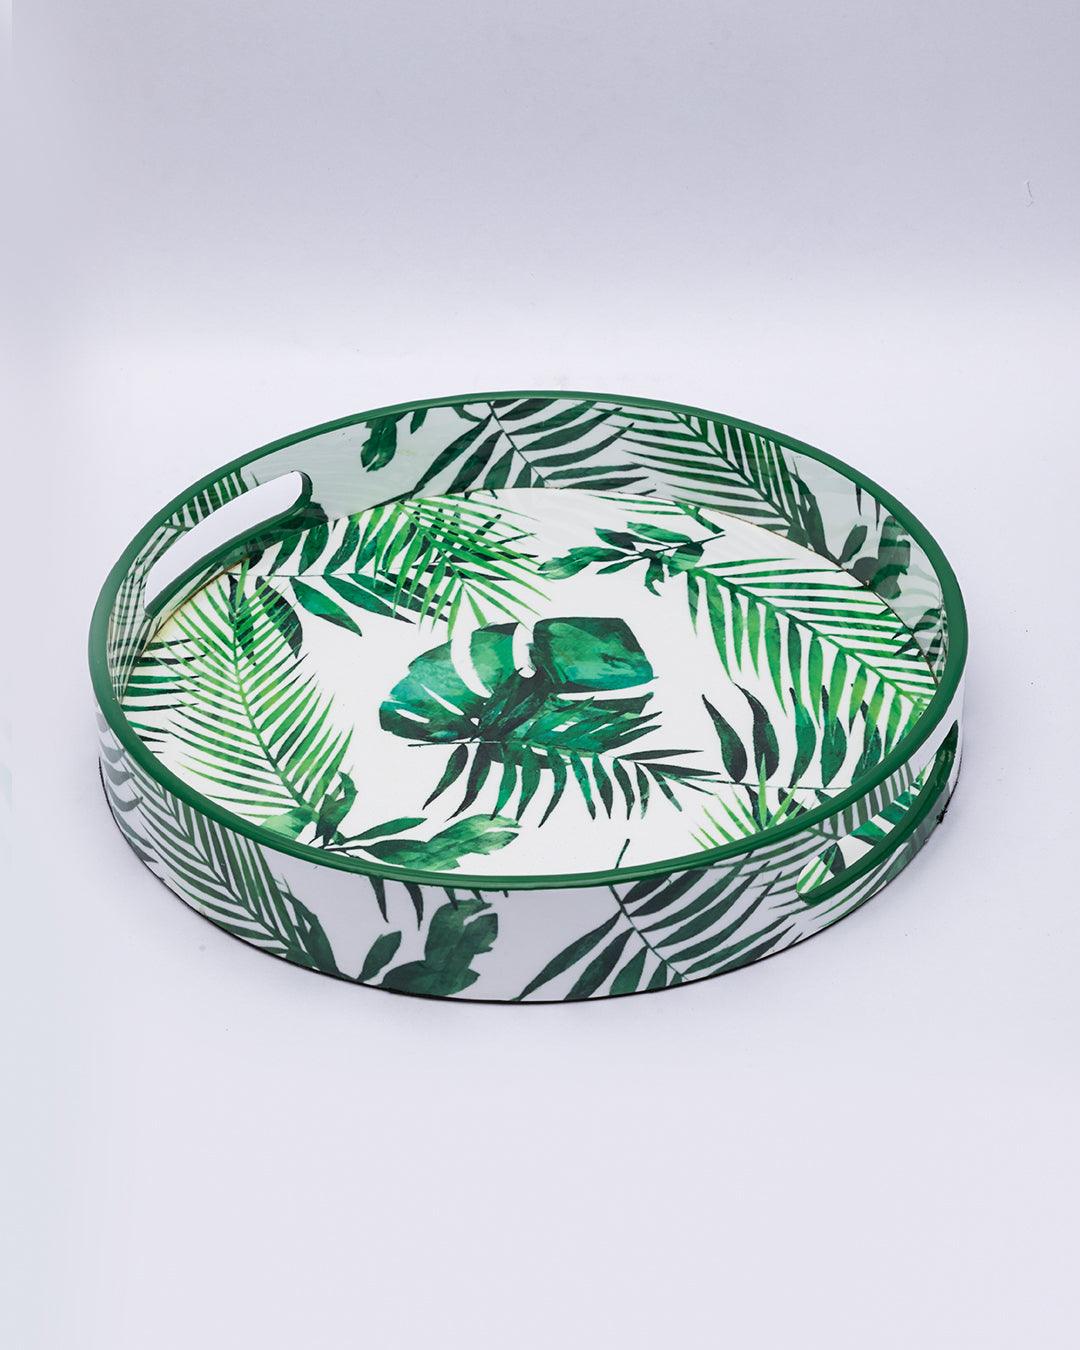 Market99 Decorative Serving Tray, Wooden Tray with Handles, Nature Inspired Design Tray, Home Décor, Medium, Round, Green Colour, MDF - MARKET 99